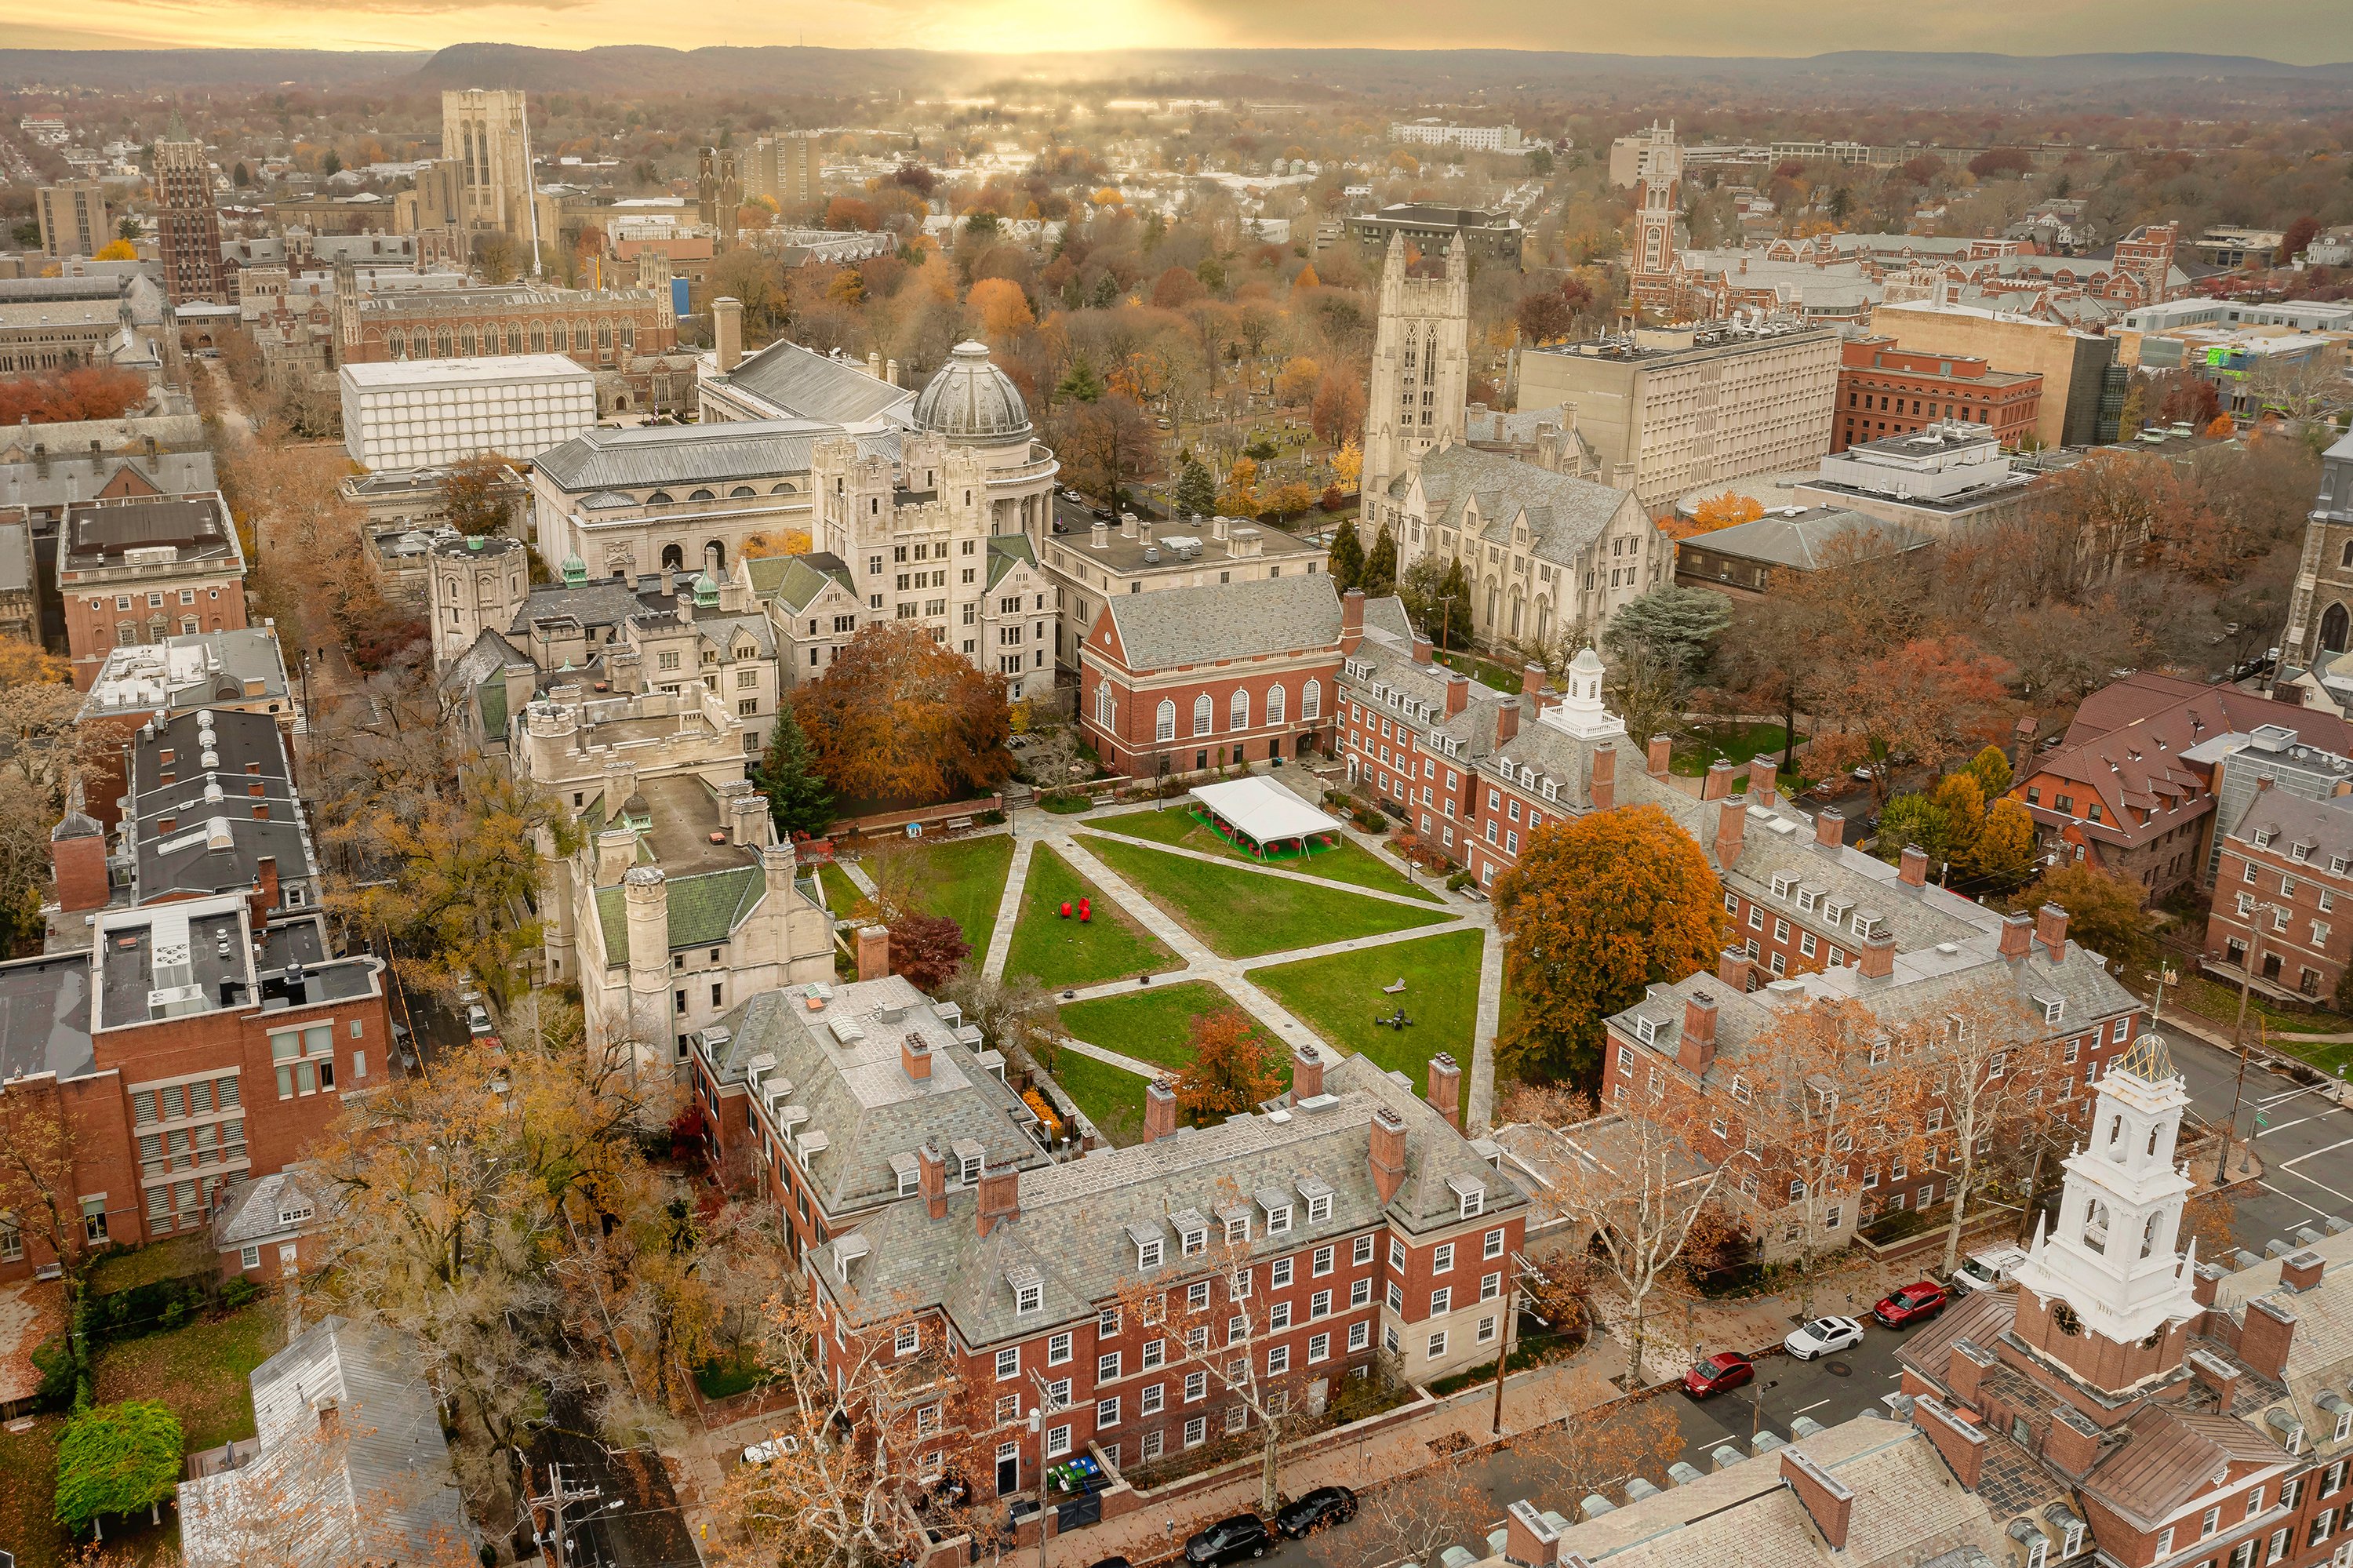 How to Get Into Yale University: All You Need to Know | IvyWise